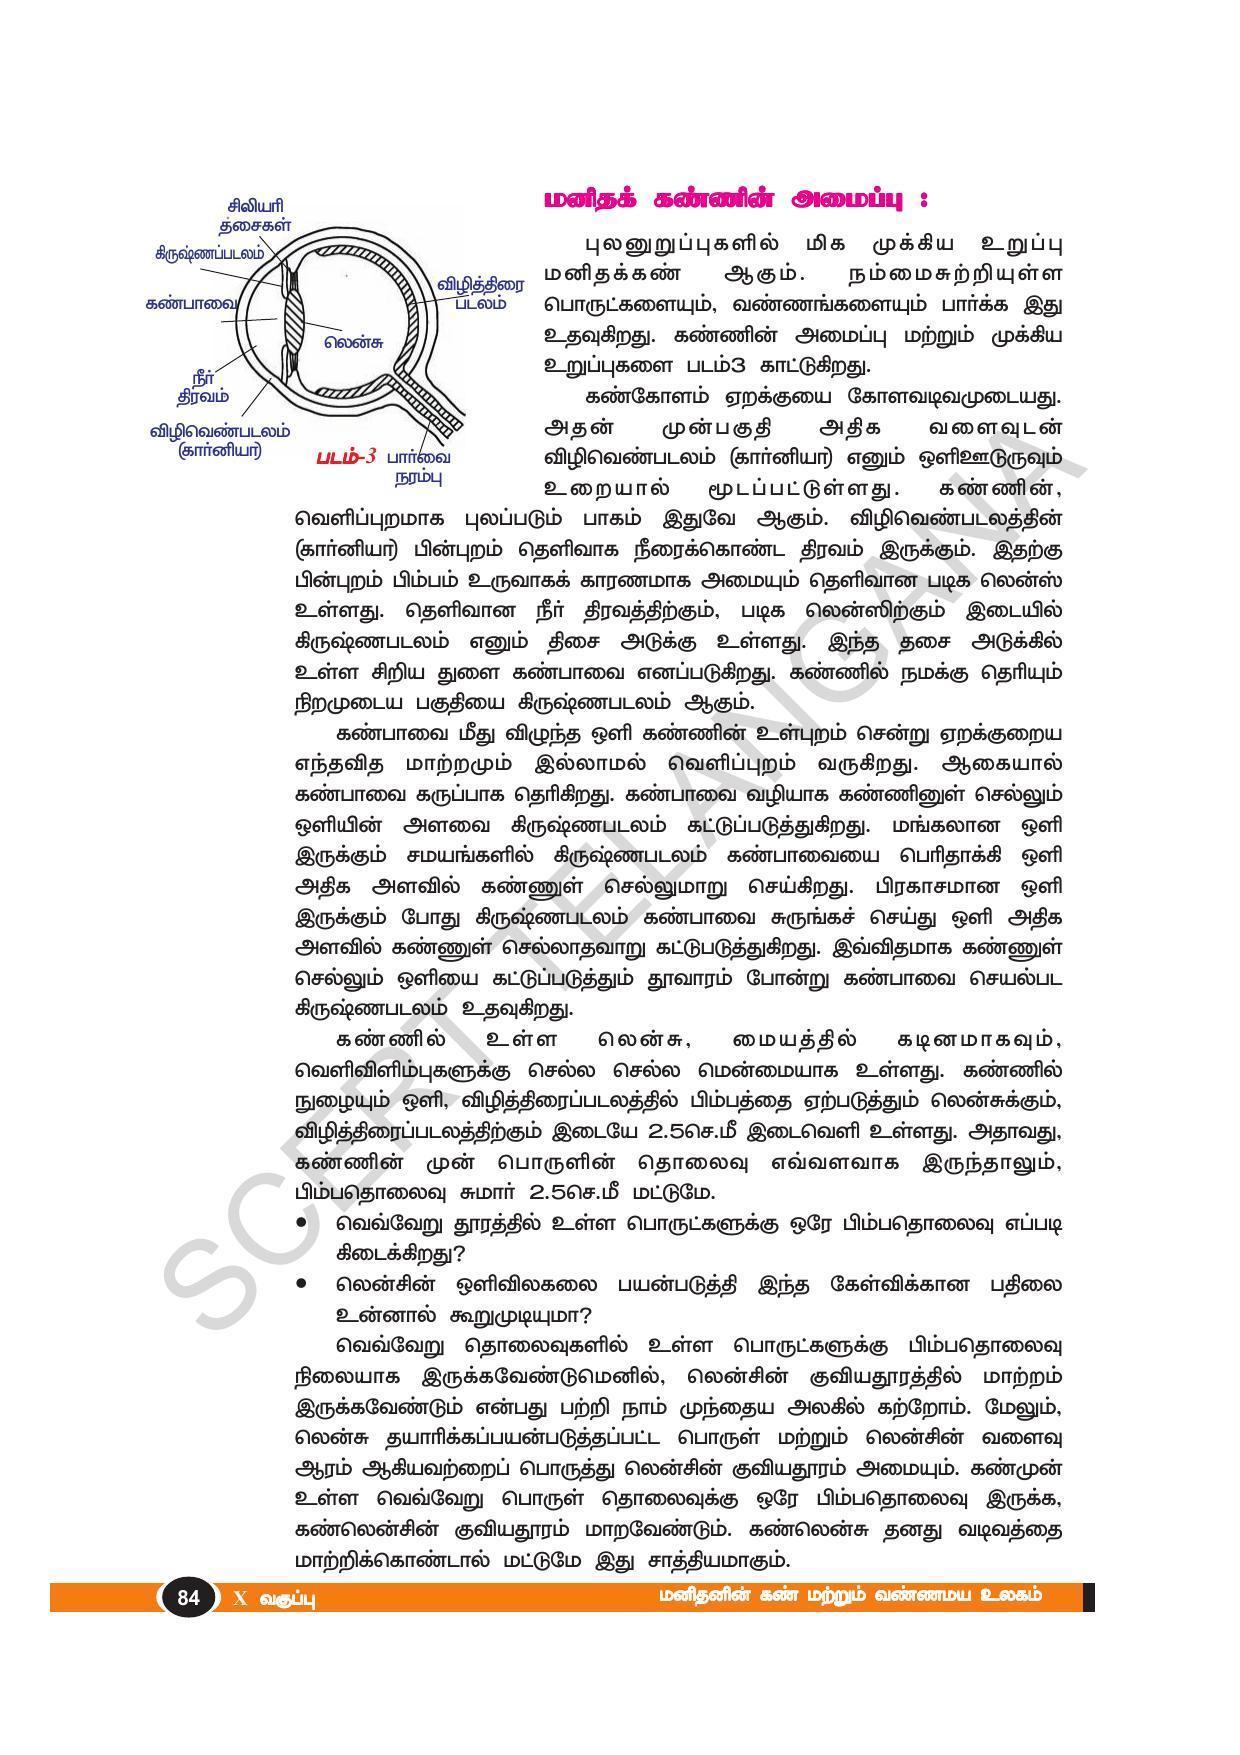 TS SCERT Class 10 Physical Science(Tamil Medium) Text Book - Page 96